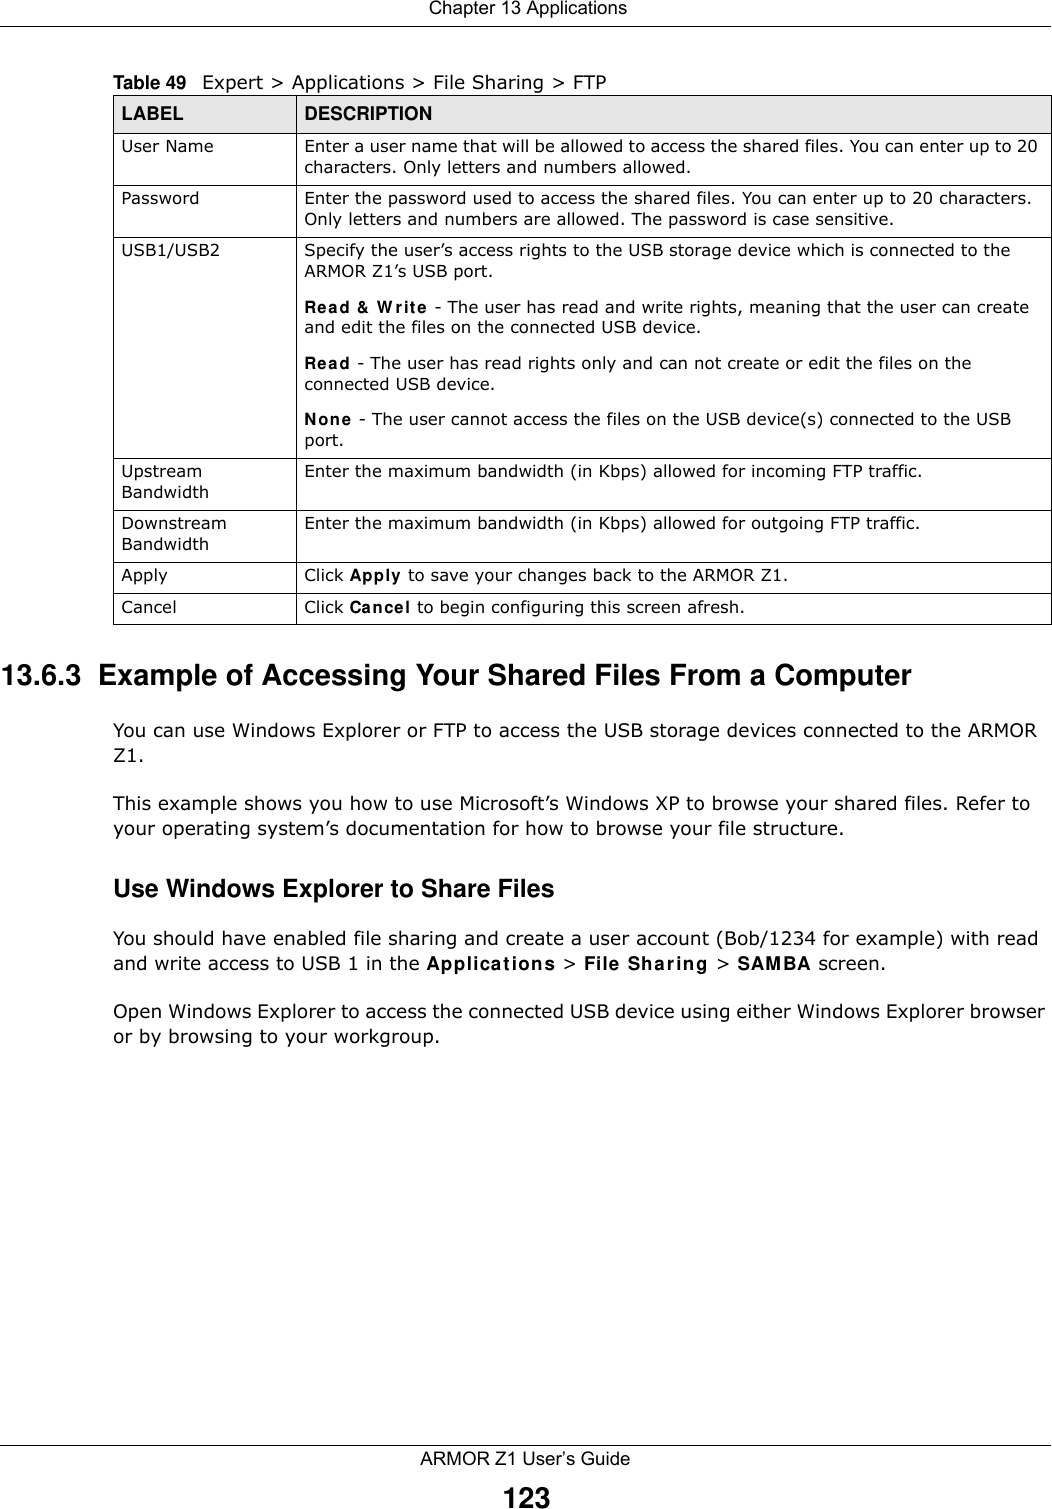  Chapter 13 ApplicationsARMOR Z1 User’s Guide12313.6.3  Example of Accessing Your Shared Files From a Computer You can use Windows Explorer or FTP to access the USB storage devices connected to the ARMOR Z1.This example shows you how to use Microsoft’s Windows XP to browse your shared files. Refer to your operating system’s documentation for how to browse your file structure. Use Windows Explorer to Share Files You should have enabled file sharing and create a user account (Bob/1234 for example) with read and write access to USB 1 in the Applications &gt; File Sharing &gt; SAMBA screen.Open Windows Explorer to access the connected USB device using either Windows Explorer browser or by browsing to your workgroup.User Name Enter a user name that will be allowed to access the shared files. You can enter up to 20 characters. Only letters and numbers allowed.Password Enter the password used to access the shared files. You can enter up to 20 characters. Only letters and numbers are allowed. The password is case sensitive.USB1/USB2 Specify the user’s access rights to the USB storage device which is connected to the ARMOR Z1’s USB port.Read &amp; Write - The user has read and write rights, meaning that the user can create and edit the files on the connected USB device.Read - The user has read rights only and can not create or edit the files on the connected USB device.None - The user cannot access the files on the USB device(s) connected to the USB port.Upstream BandwidthEnter the maximum bandwidth (in Kbps) allowed for incoming FTP traffic.Downstream BandwidthEnter the maximum bandwidth (in Kbps) allowed for outgoing FTP traffic.Apply Click Apply to save your changes back to the ARMOR Z1.Cancel Click Cancel to begin configuring this screen afresh.Table 49   Expert &gt; Applications &gt; File Sharing &gt; FTP LABEL DESCRIPTION